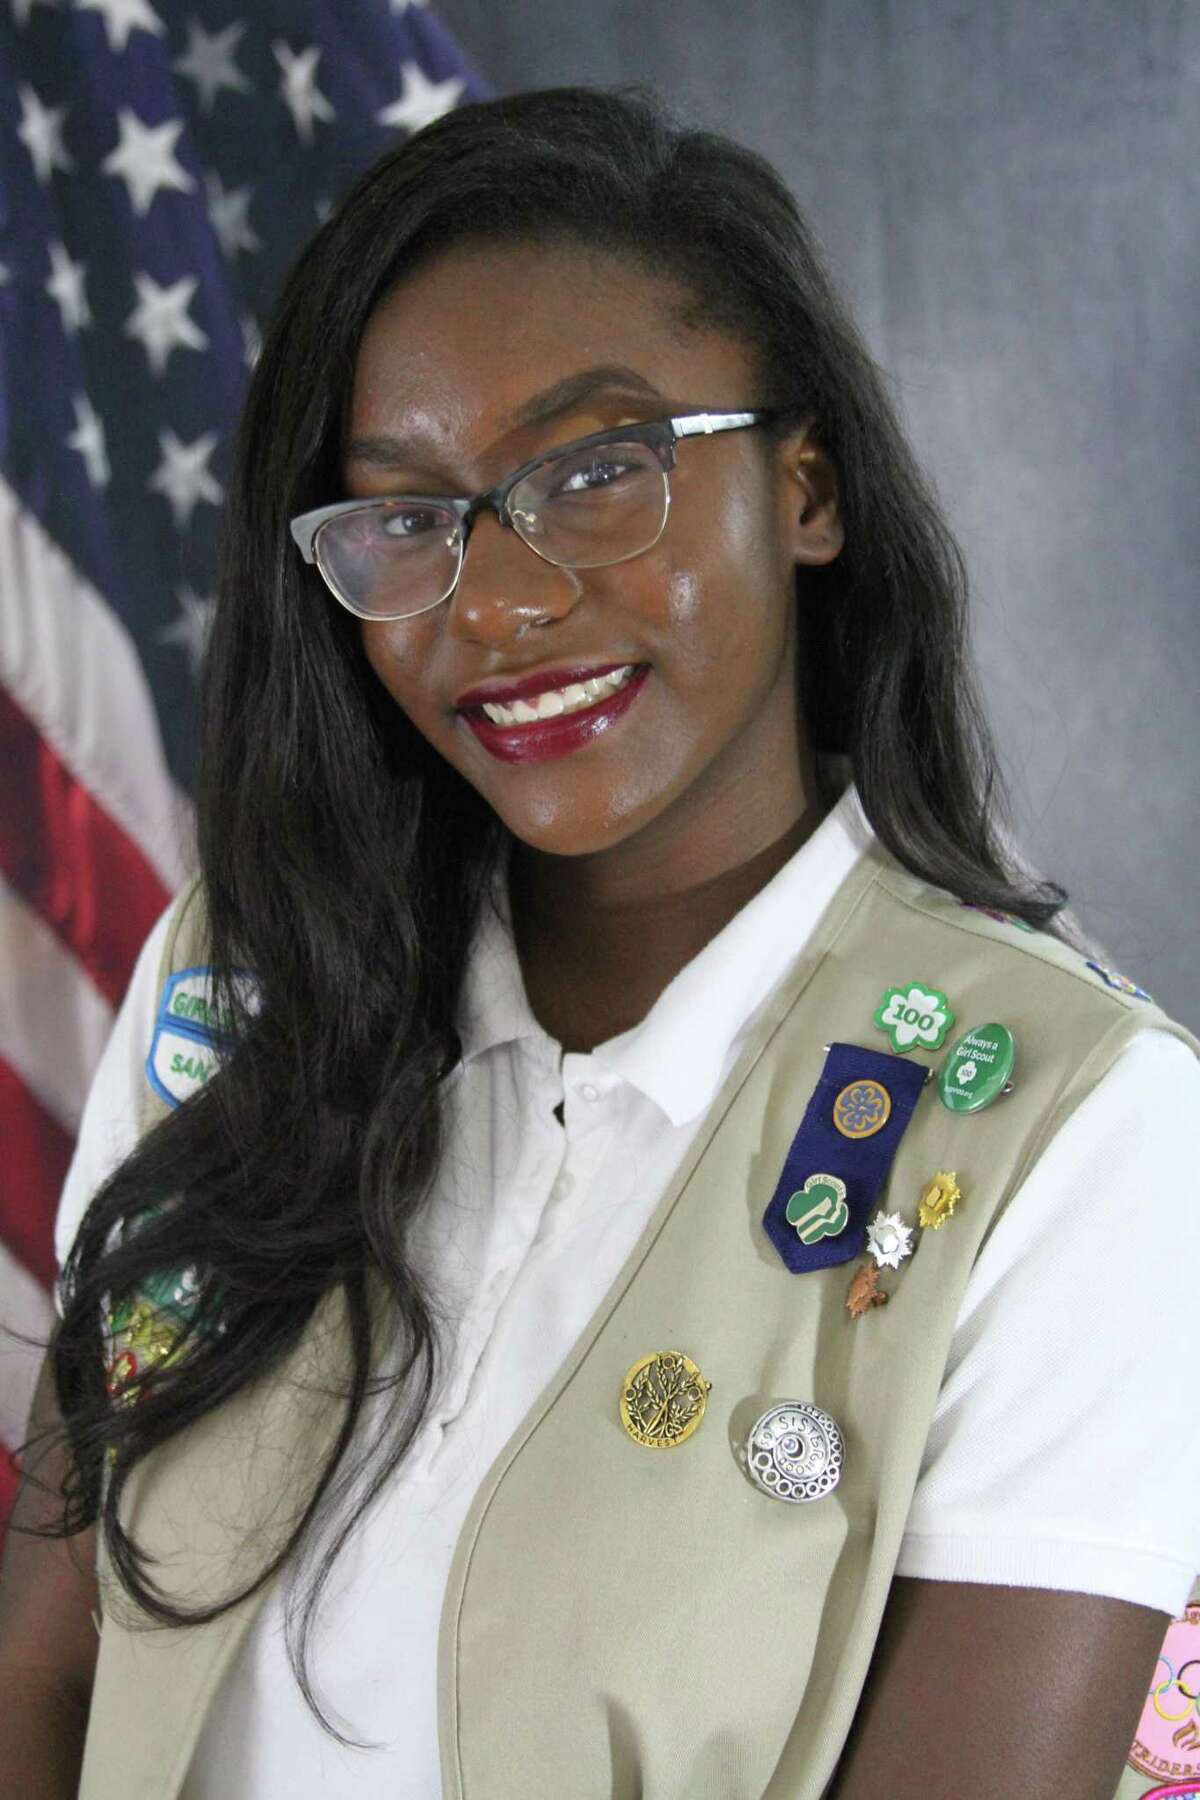 Danielle Williams, a graduate from Westside High School, has earned the Girl Scout Gold Award, the highest honor in Girl Scouting. To earn the award, Danielle helped 61 children between 7 and 11 years by teaching them how to relieve anger, frustration and express their emotions in a positive way through theater. To learn more about the Girl Scout Gold Award, visit www.gssjc.org/goldawardgirlscout.